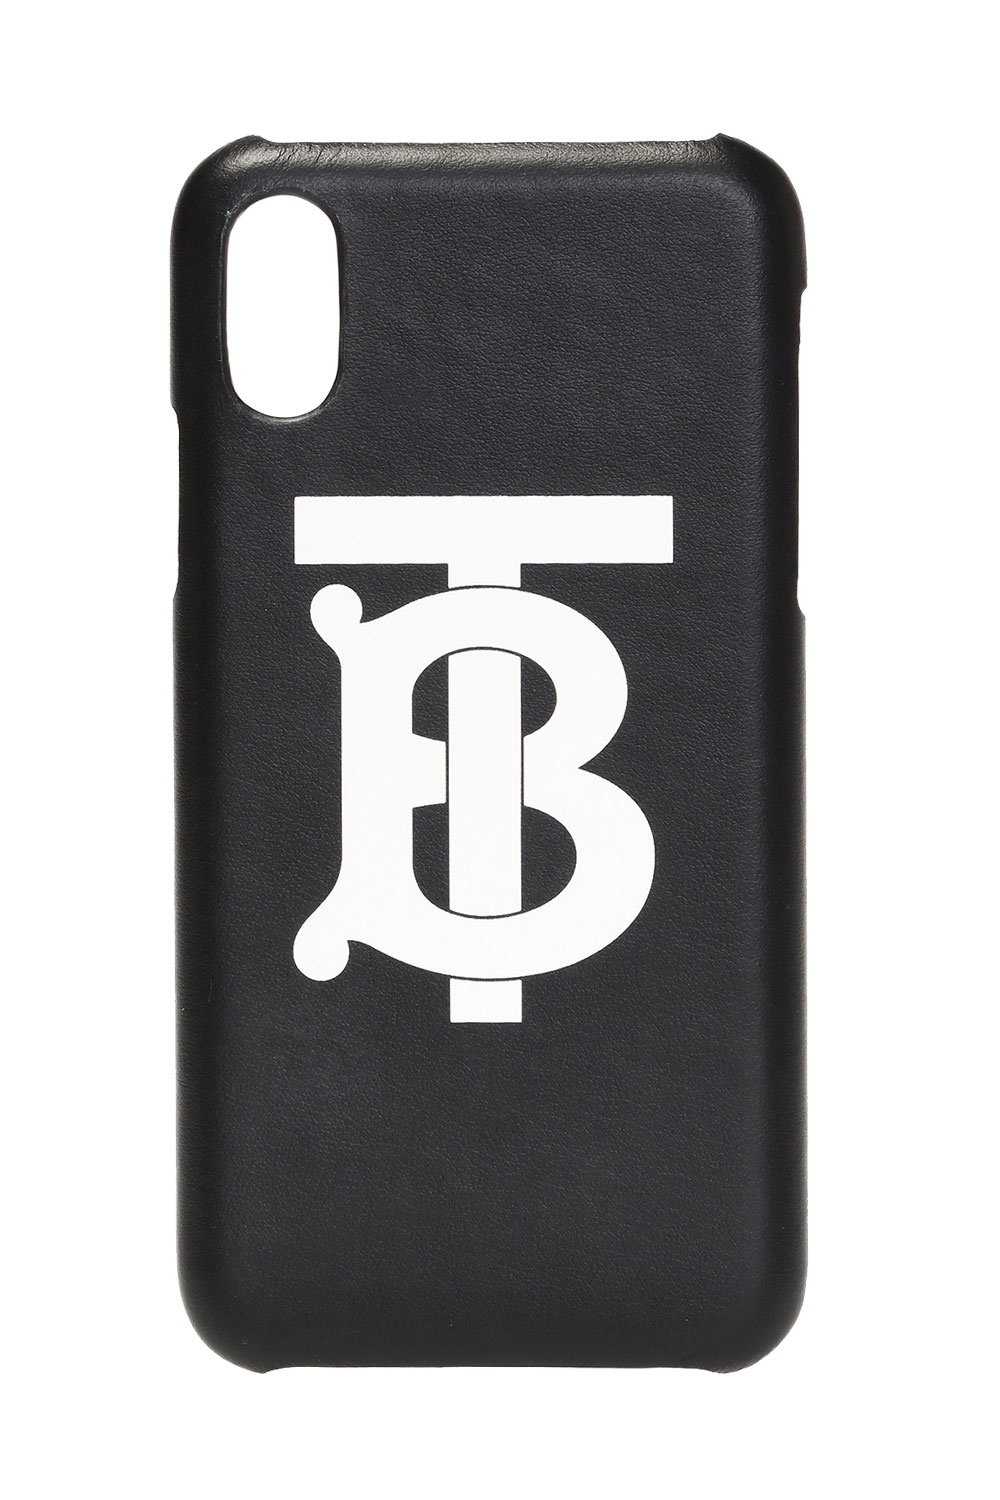 burberry iphone x cover